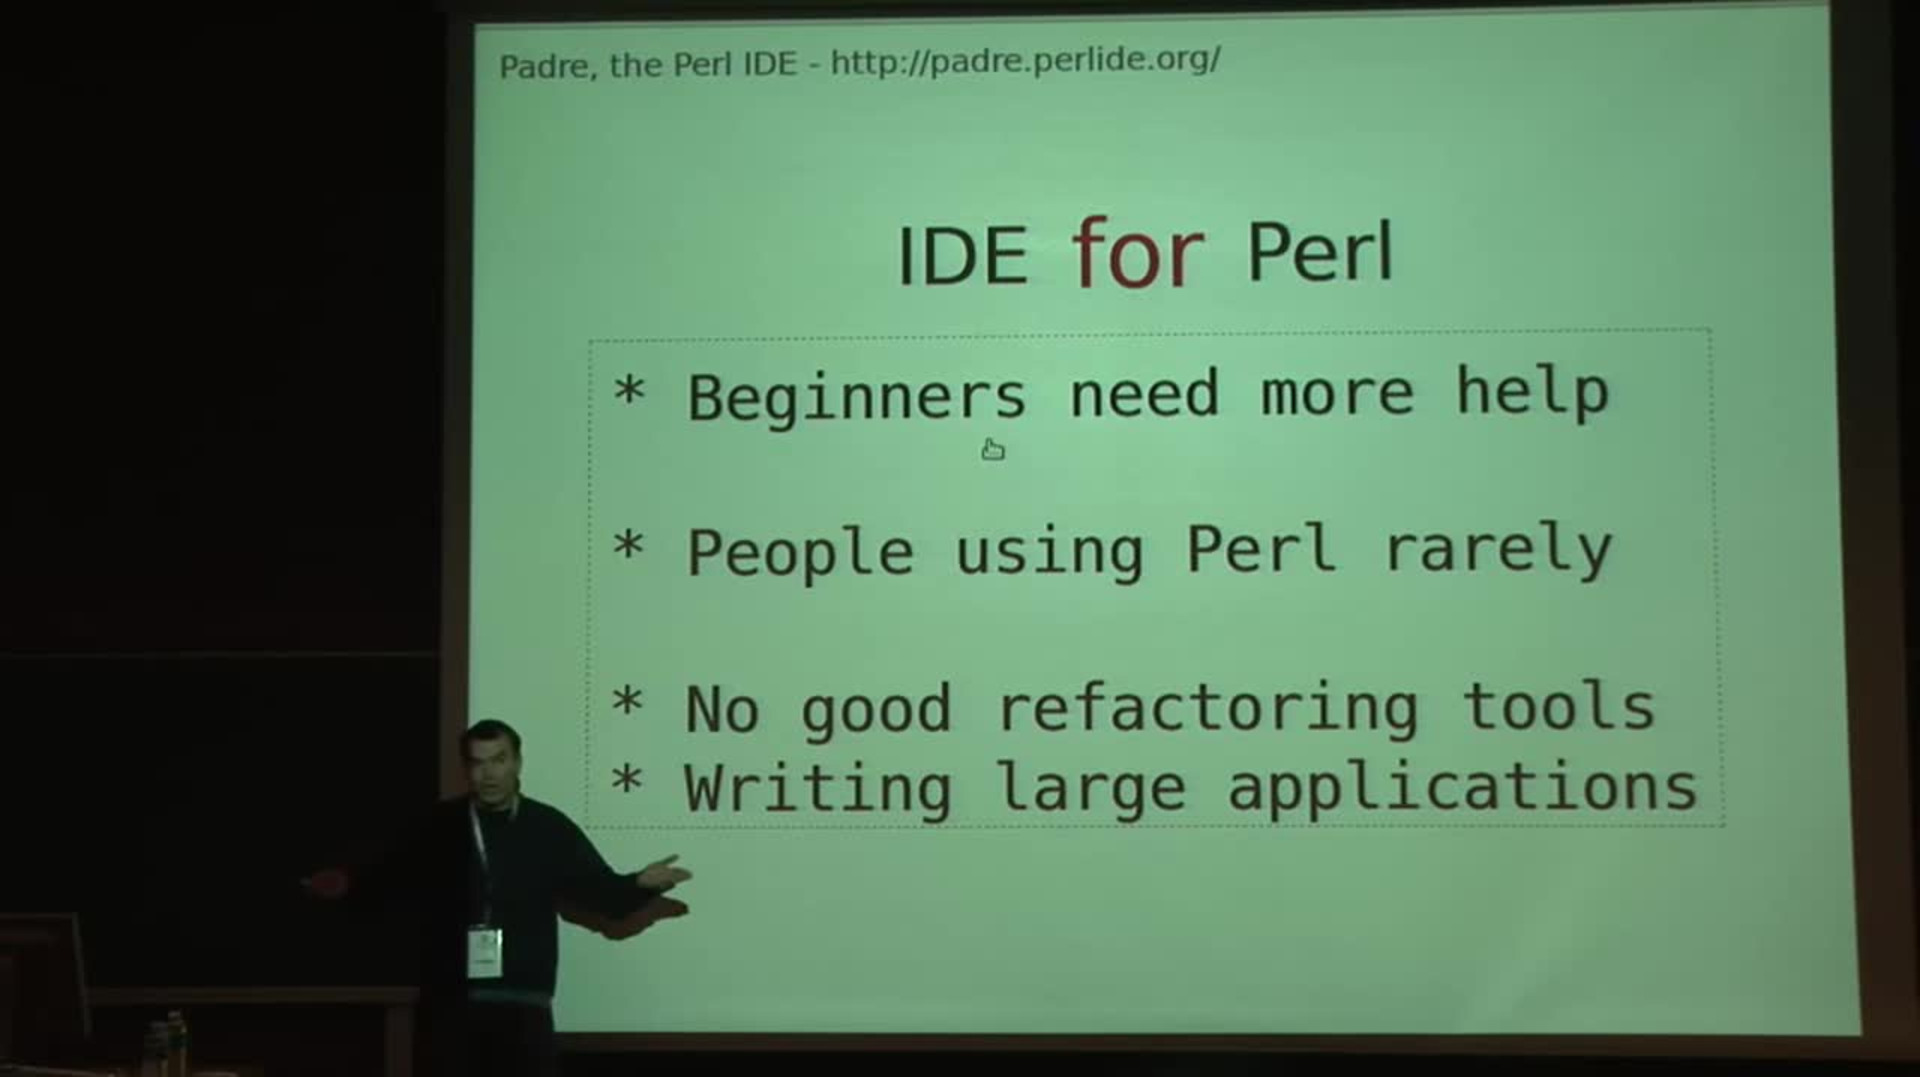 Padre, the Perl IDE: Building an open source team, getting the project to  users against the odds - TIB AV-Portal